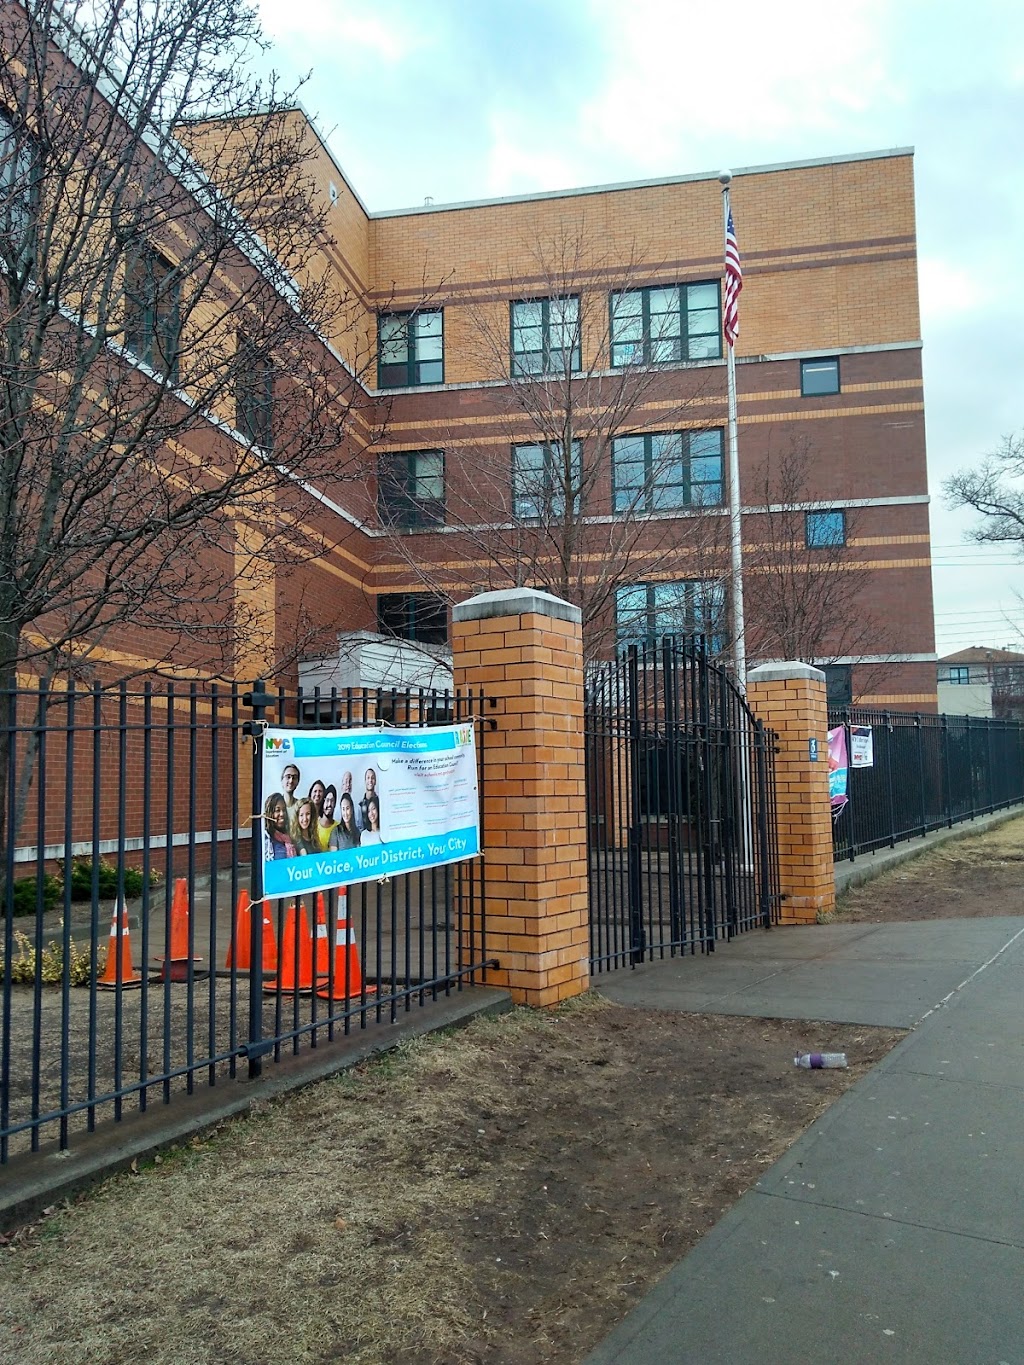 PS/IS 128Q The Lorraine Tuzzo, Juniper Valley Elementary School | 69-10 65th Dr, Queens, NY 11379 | Phone: (718) 326-6210